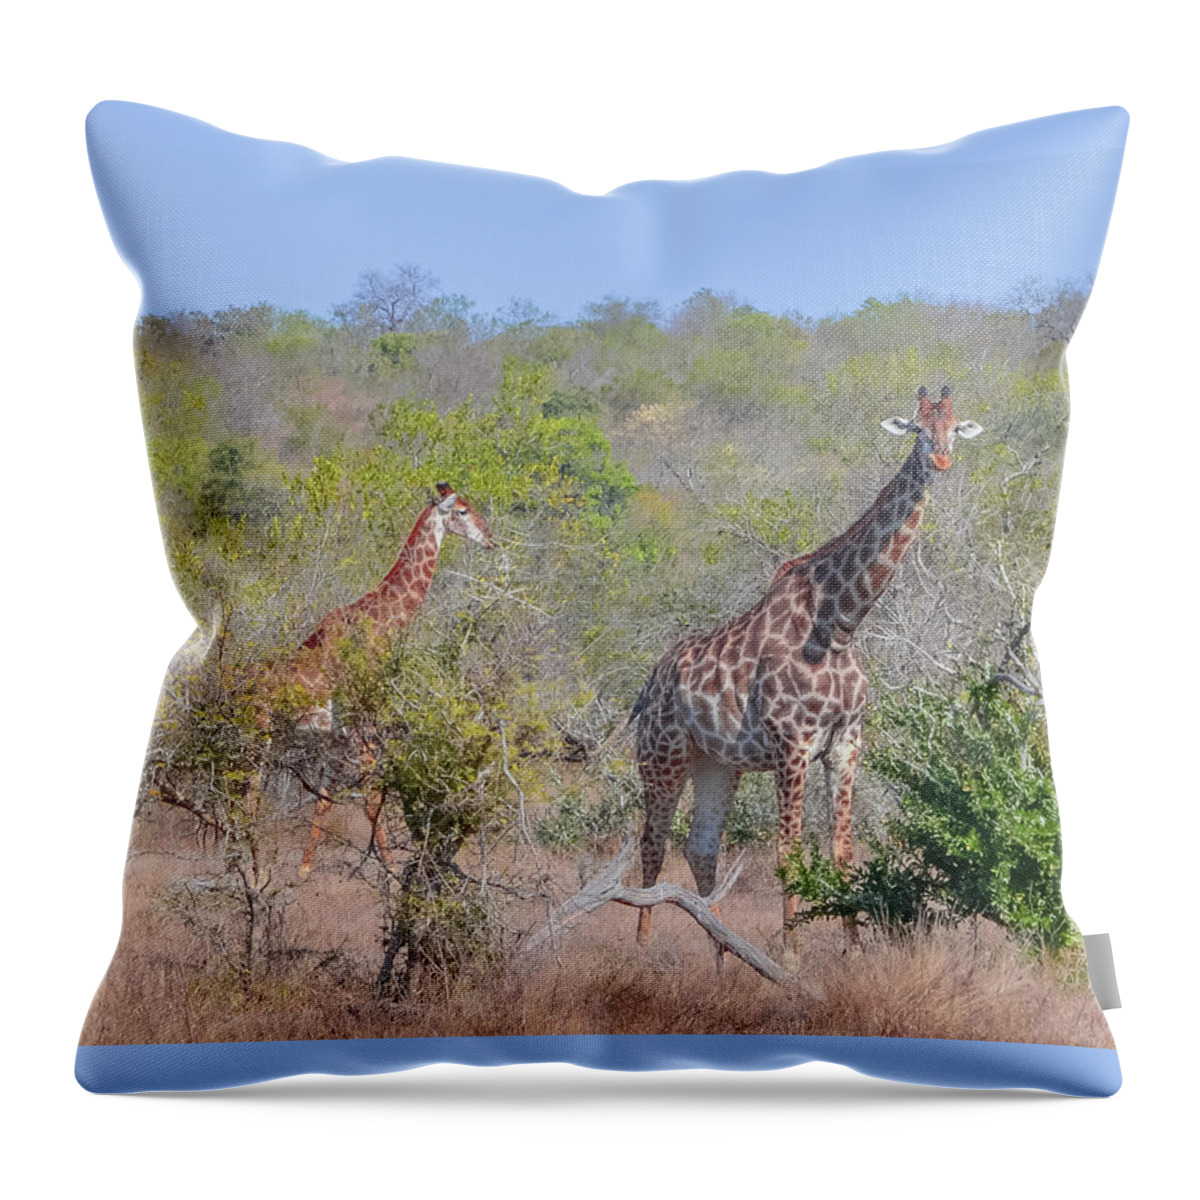 13 Jul 13 Throw Pillow featuring the photograph Giraffe Family on Safari by Jeff at JSJ Photography